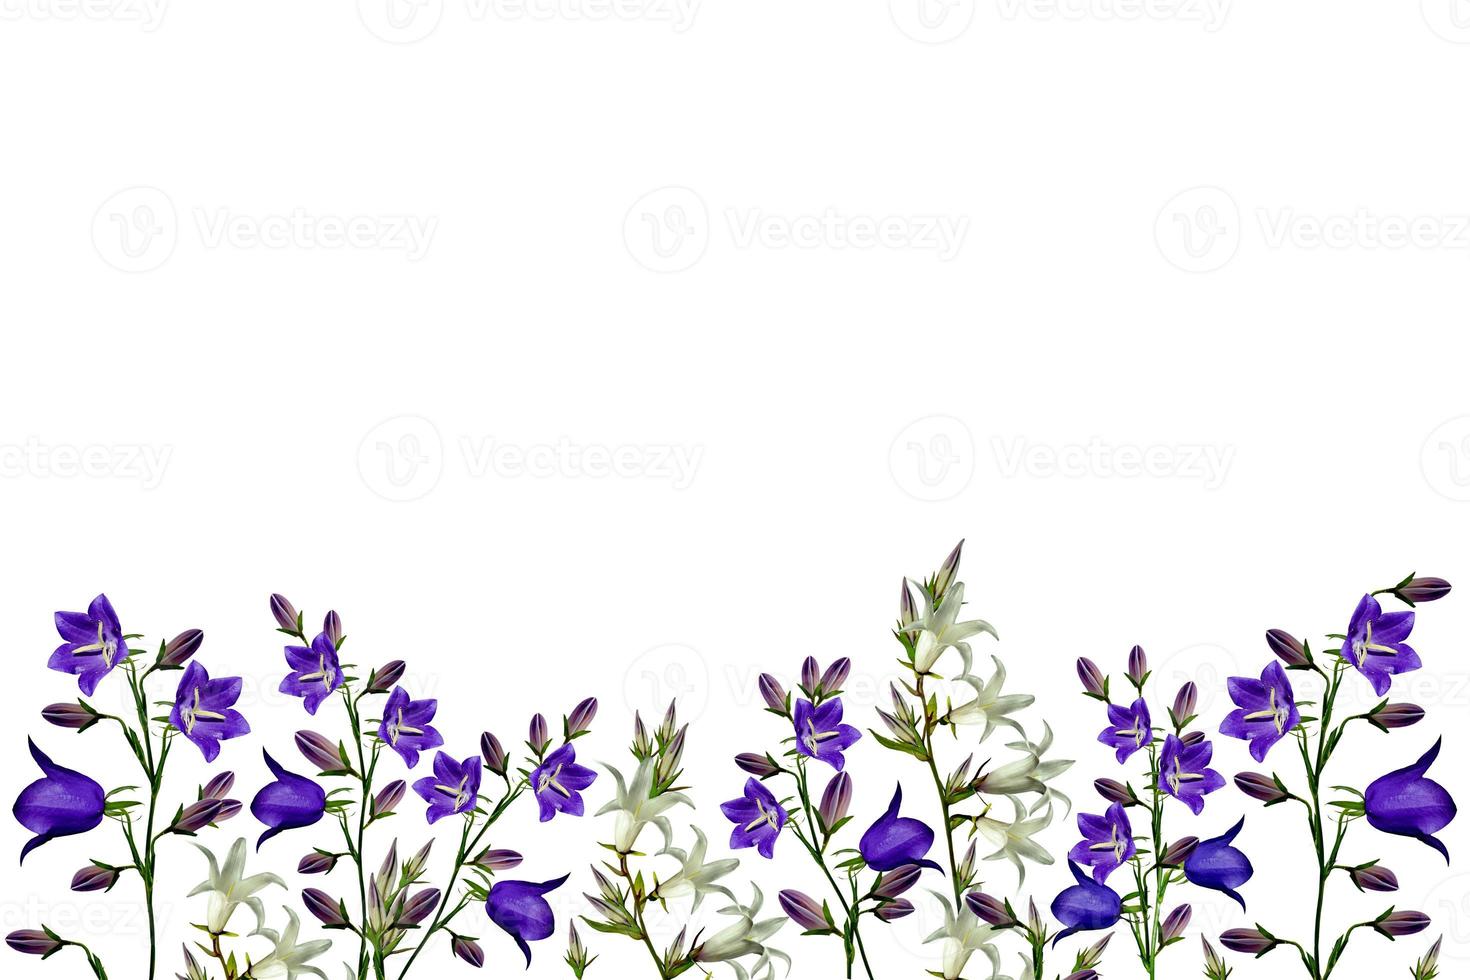 Flowers bells isolated on white background photo